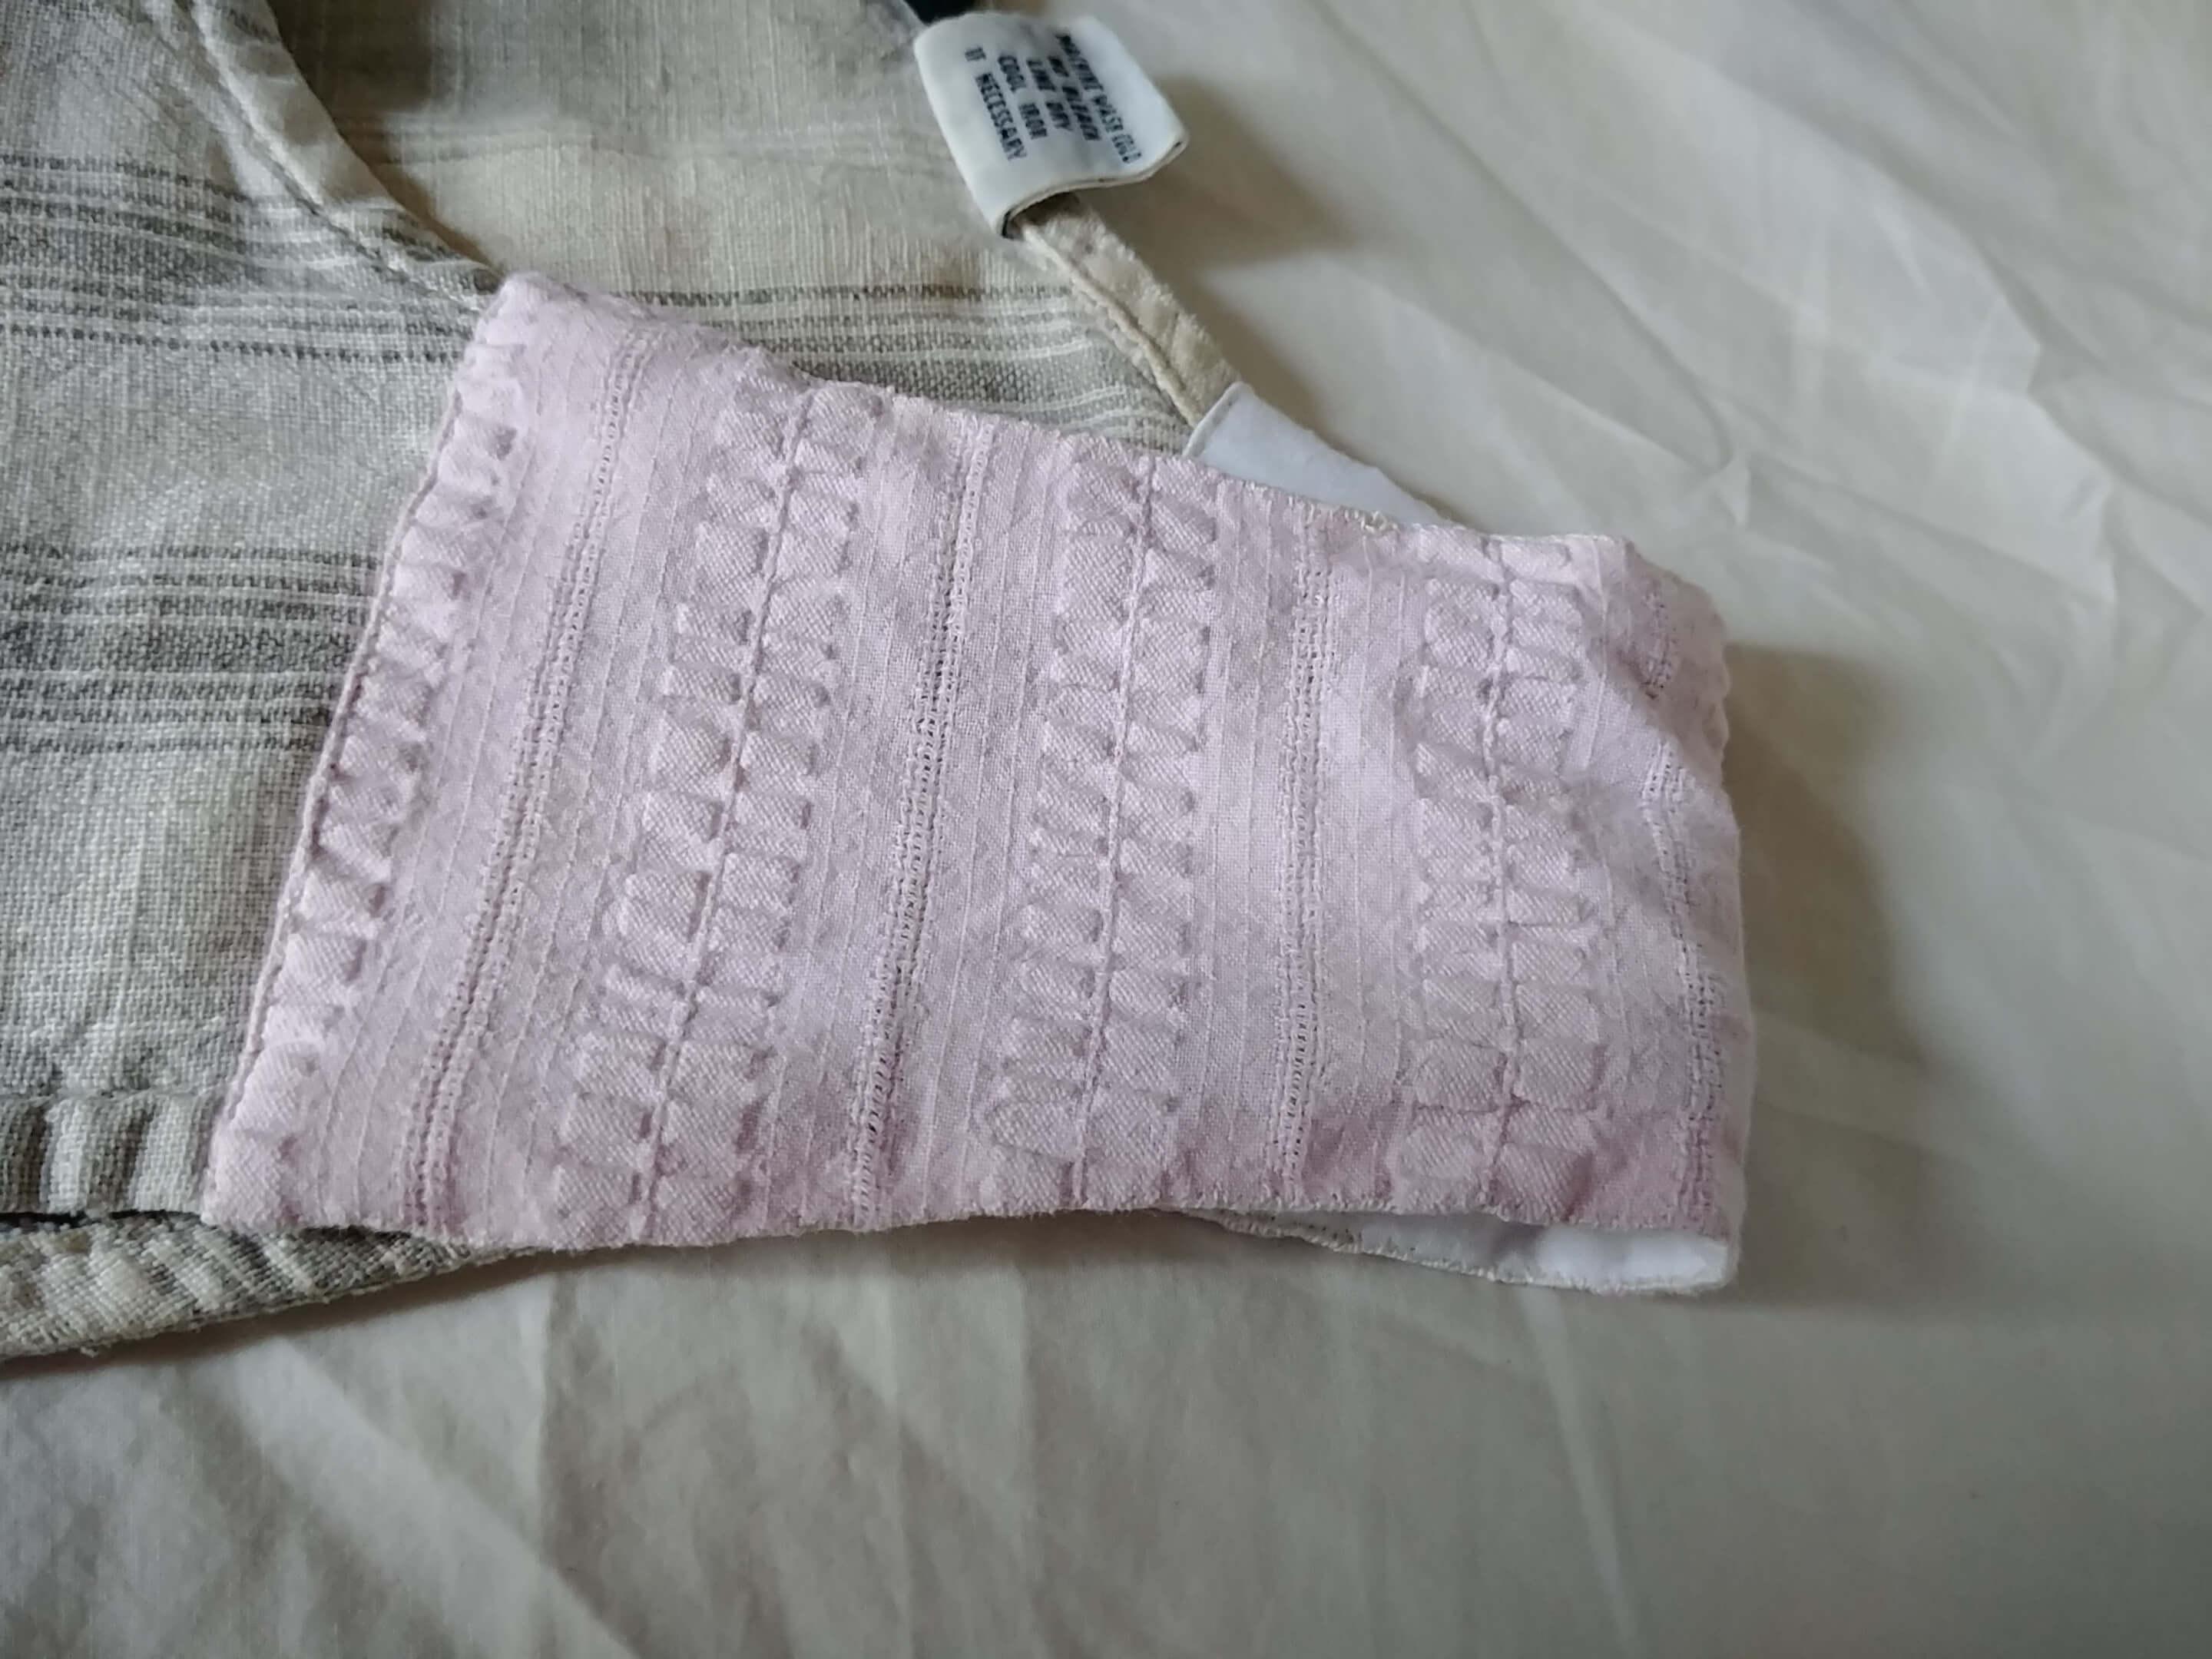 The shoulder of a white sleeveless dress with grey stripes has a large patch of pink fabric with a texture of raised, bumpy stripes